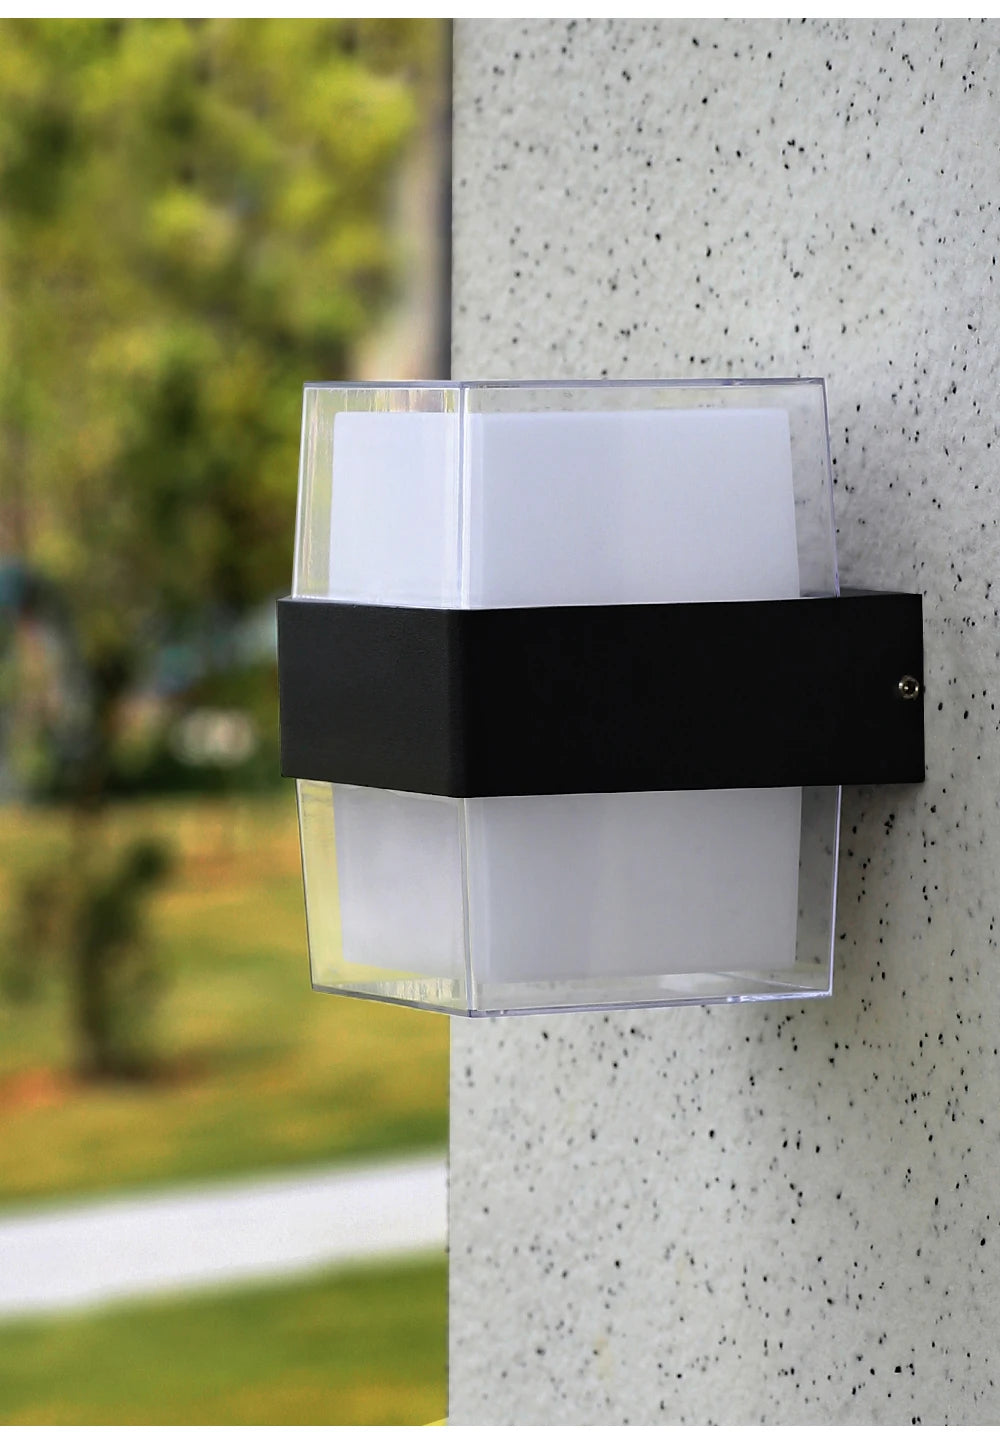 IP65 Waterproof Interior Wall Light, Modern LED wall light with aluminum body, waterproof and dimmable, suitable for indoor and outdoor use.